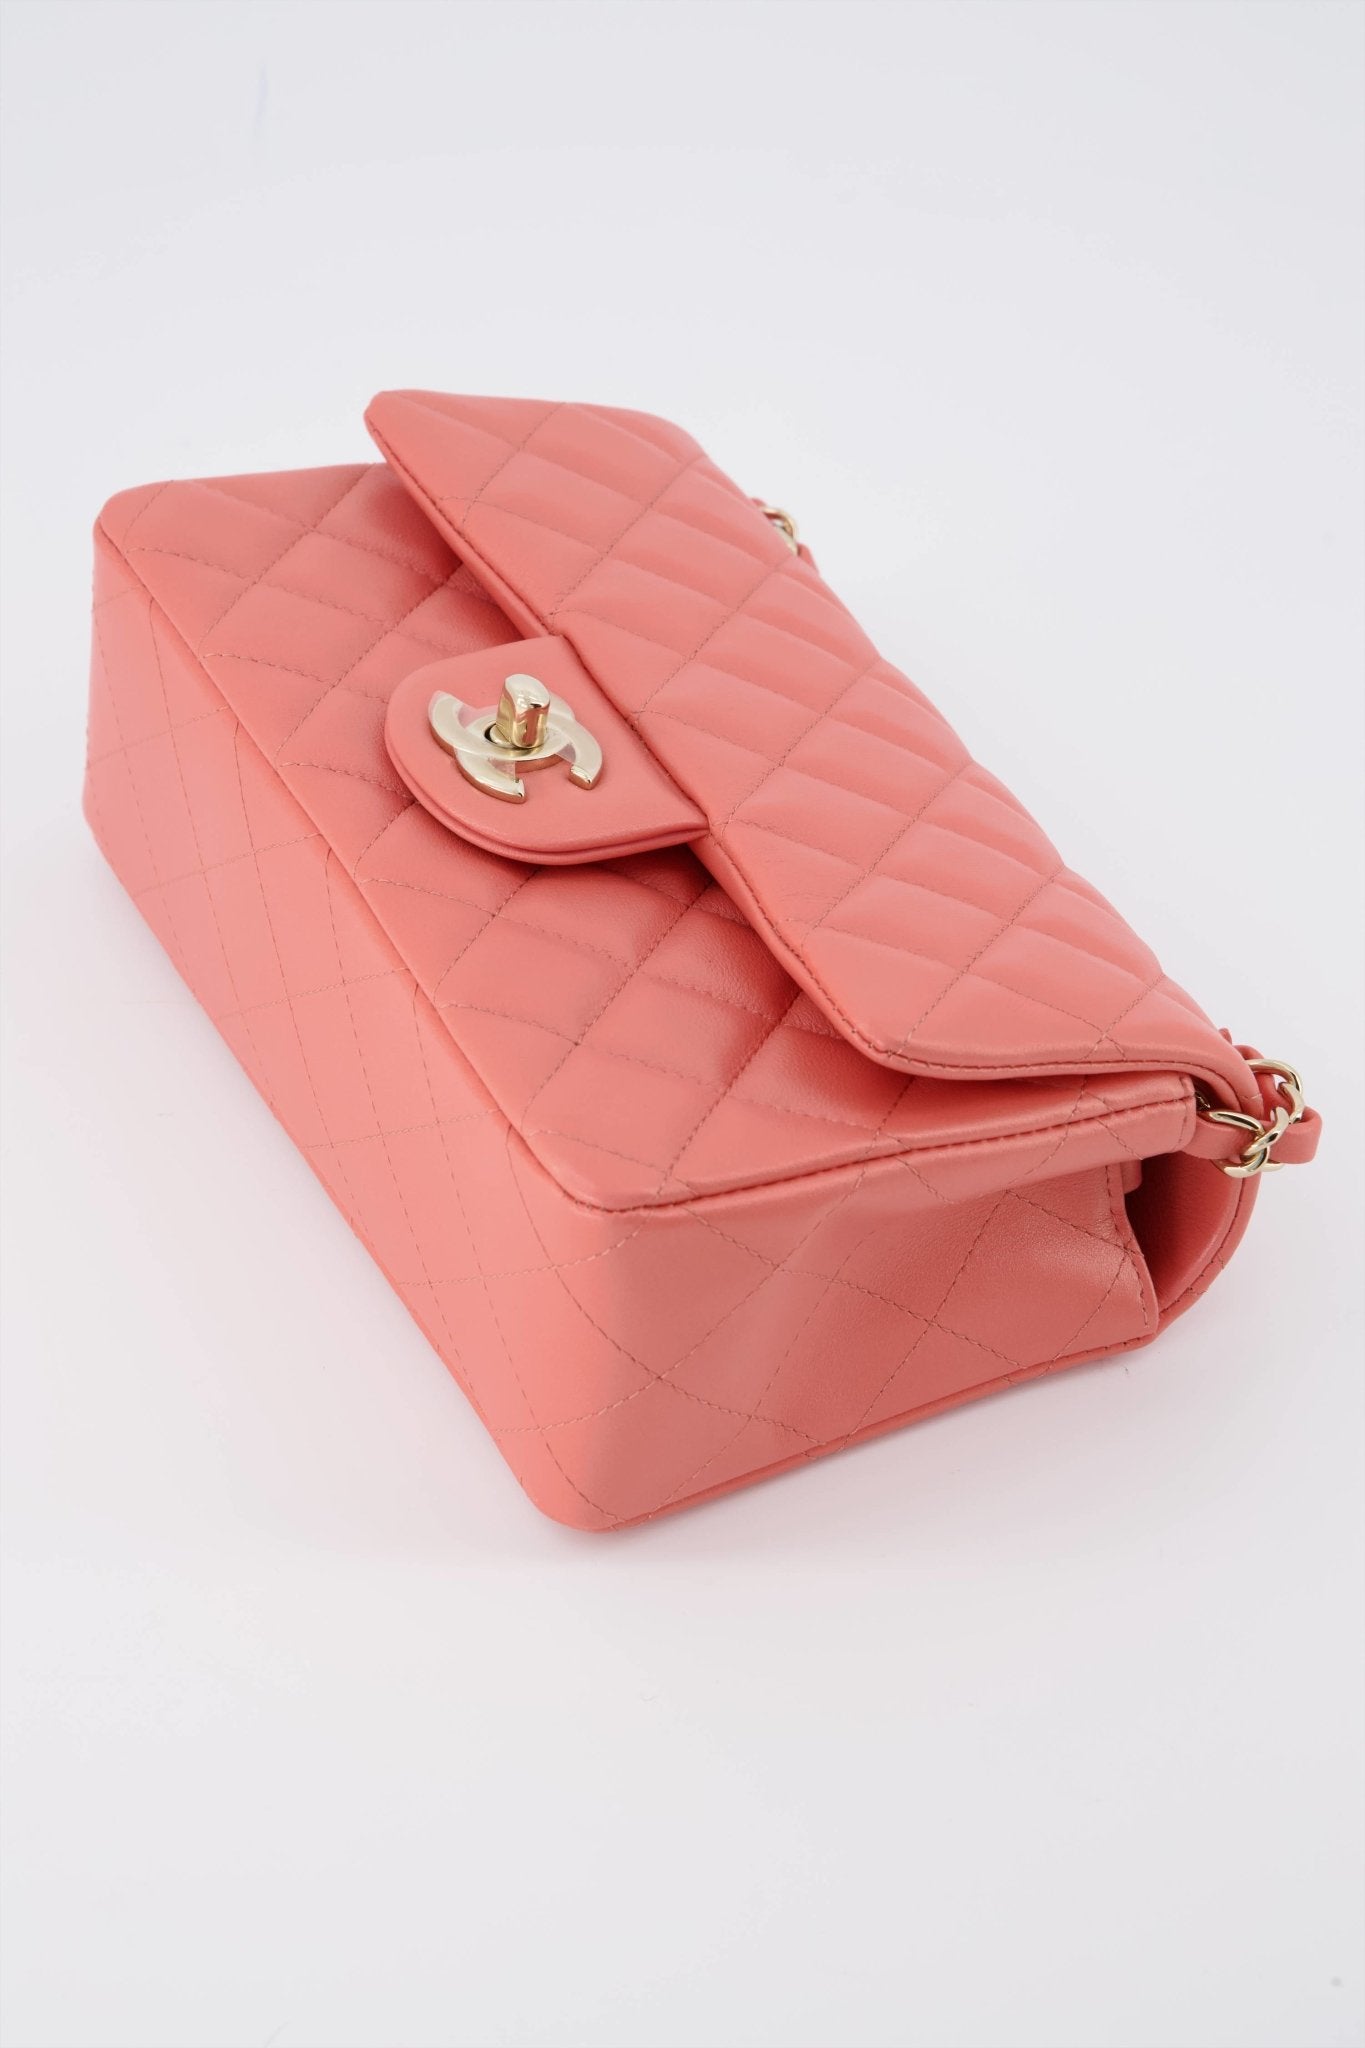 Chanel Mini Rectangular Flap Bag Pink Colour Lambskin with Champagne G